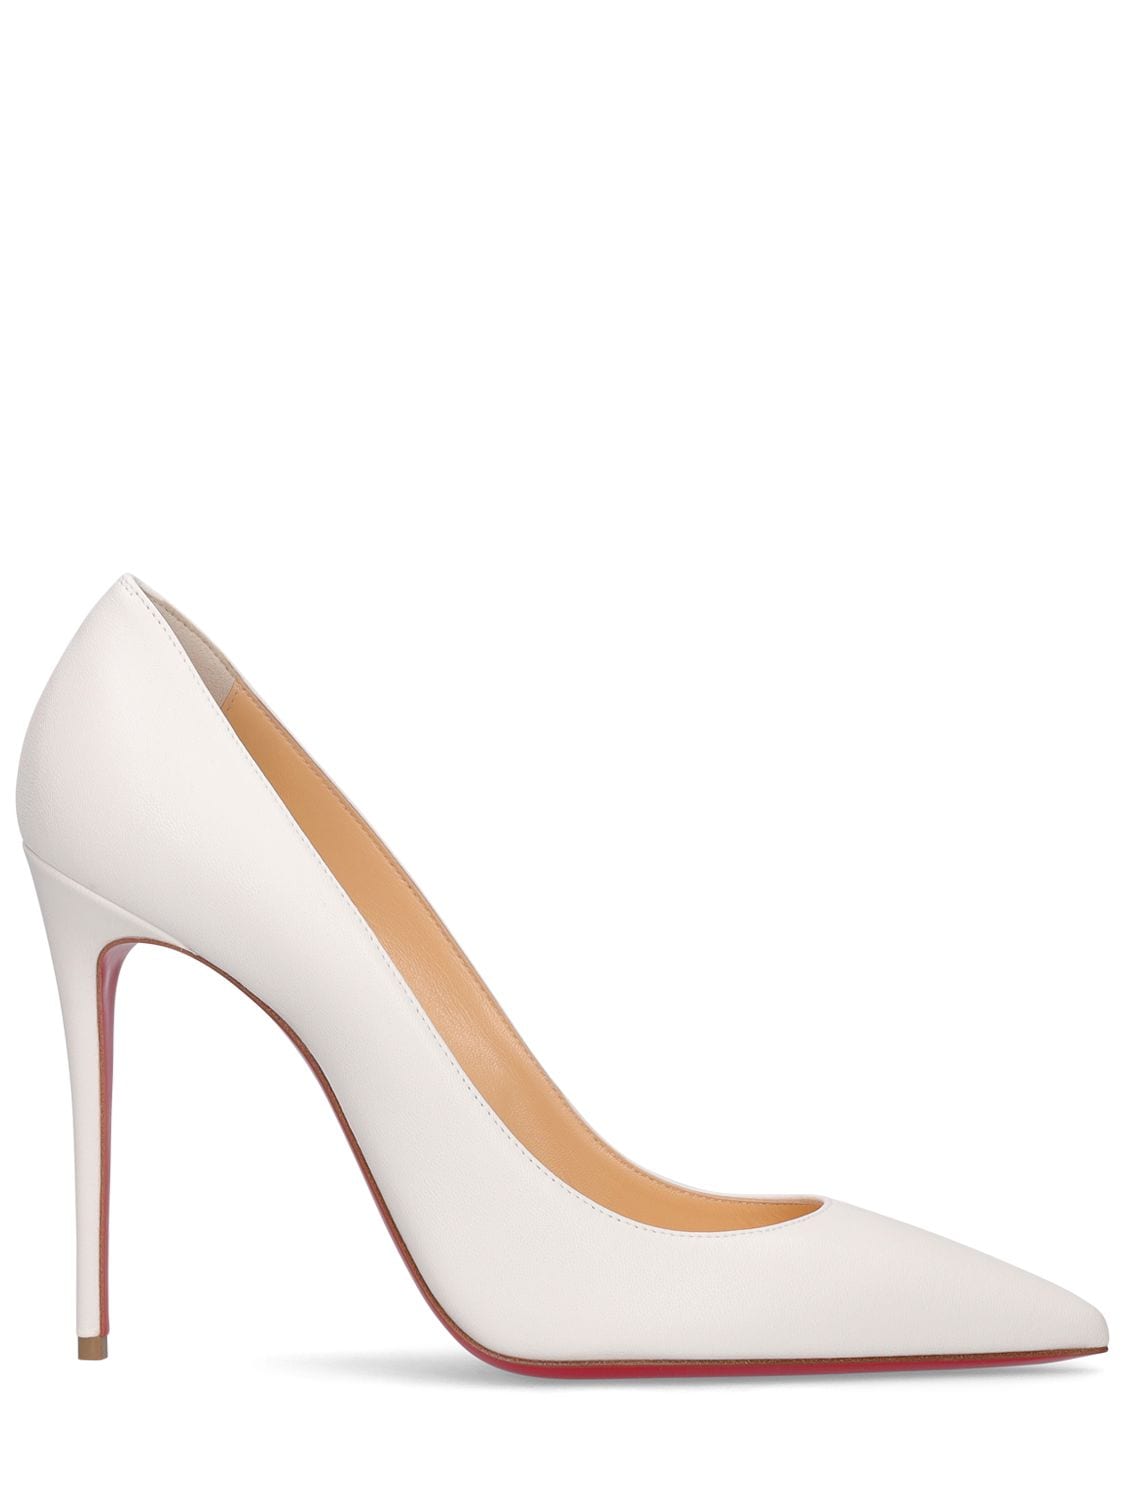 CHRISTIAN LOUBOUTIN 100mm Kate Leather Pumps